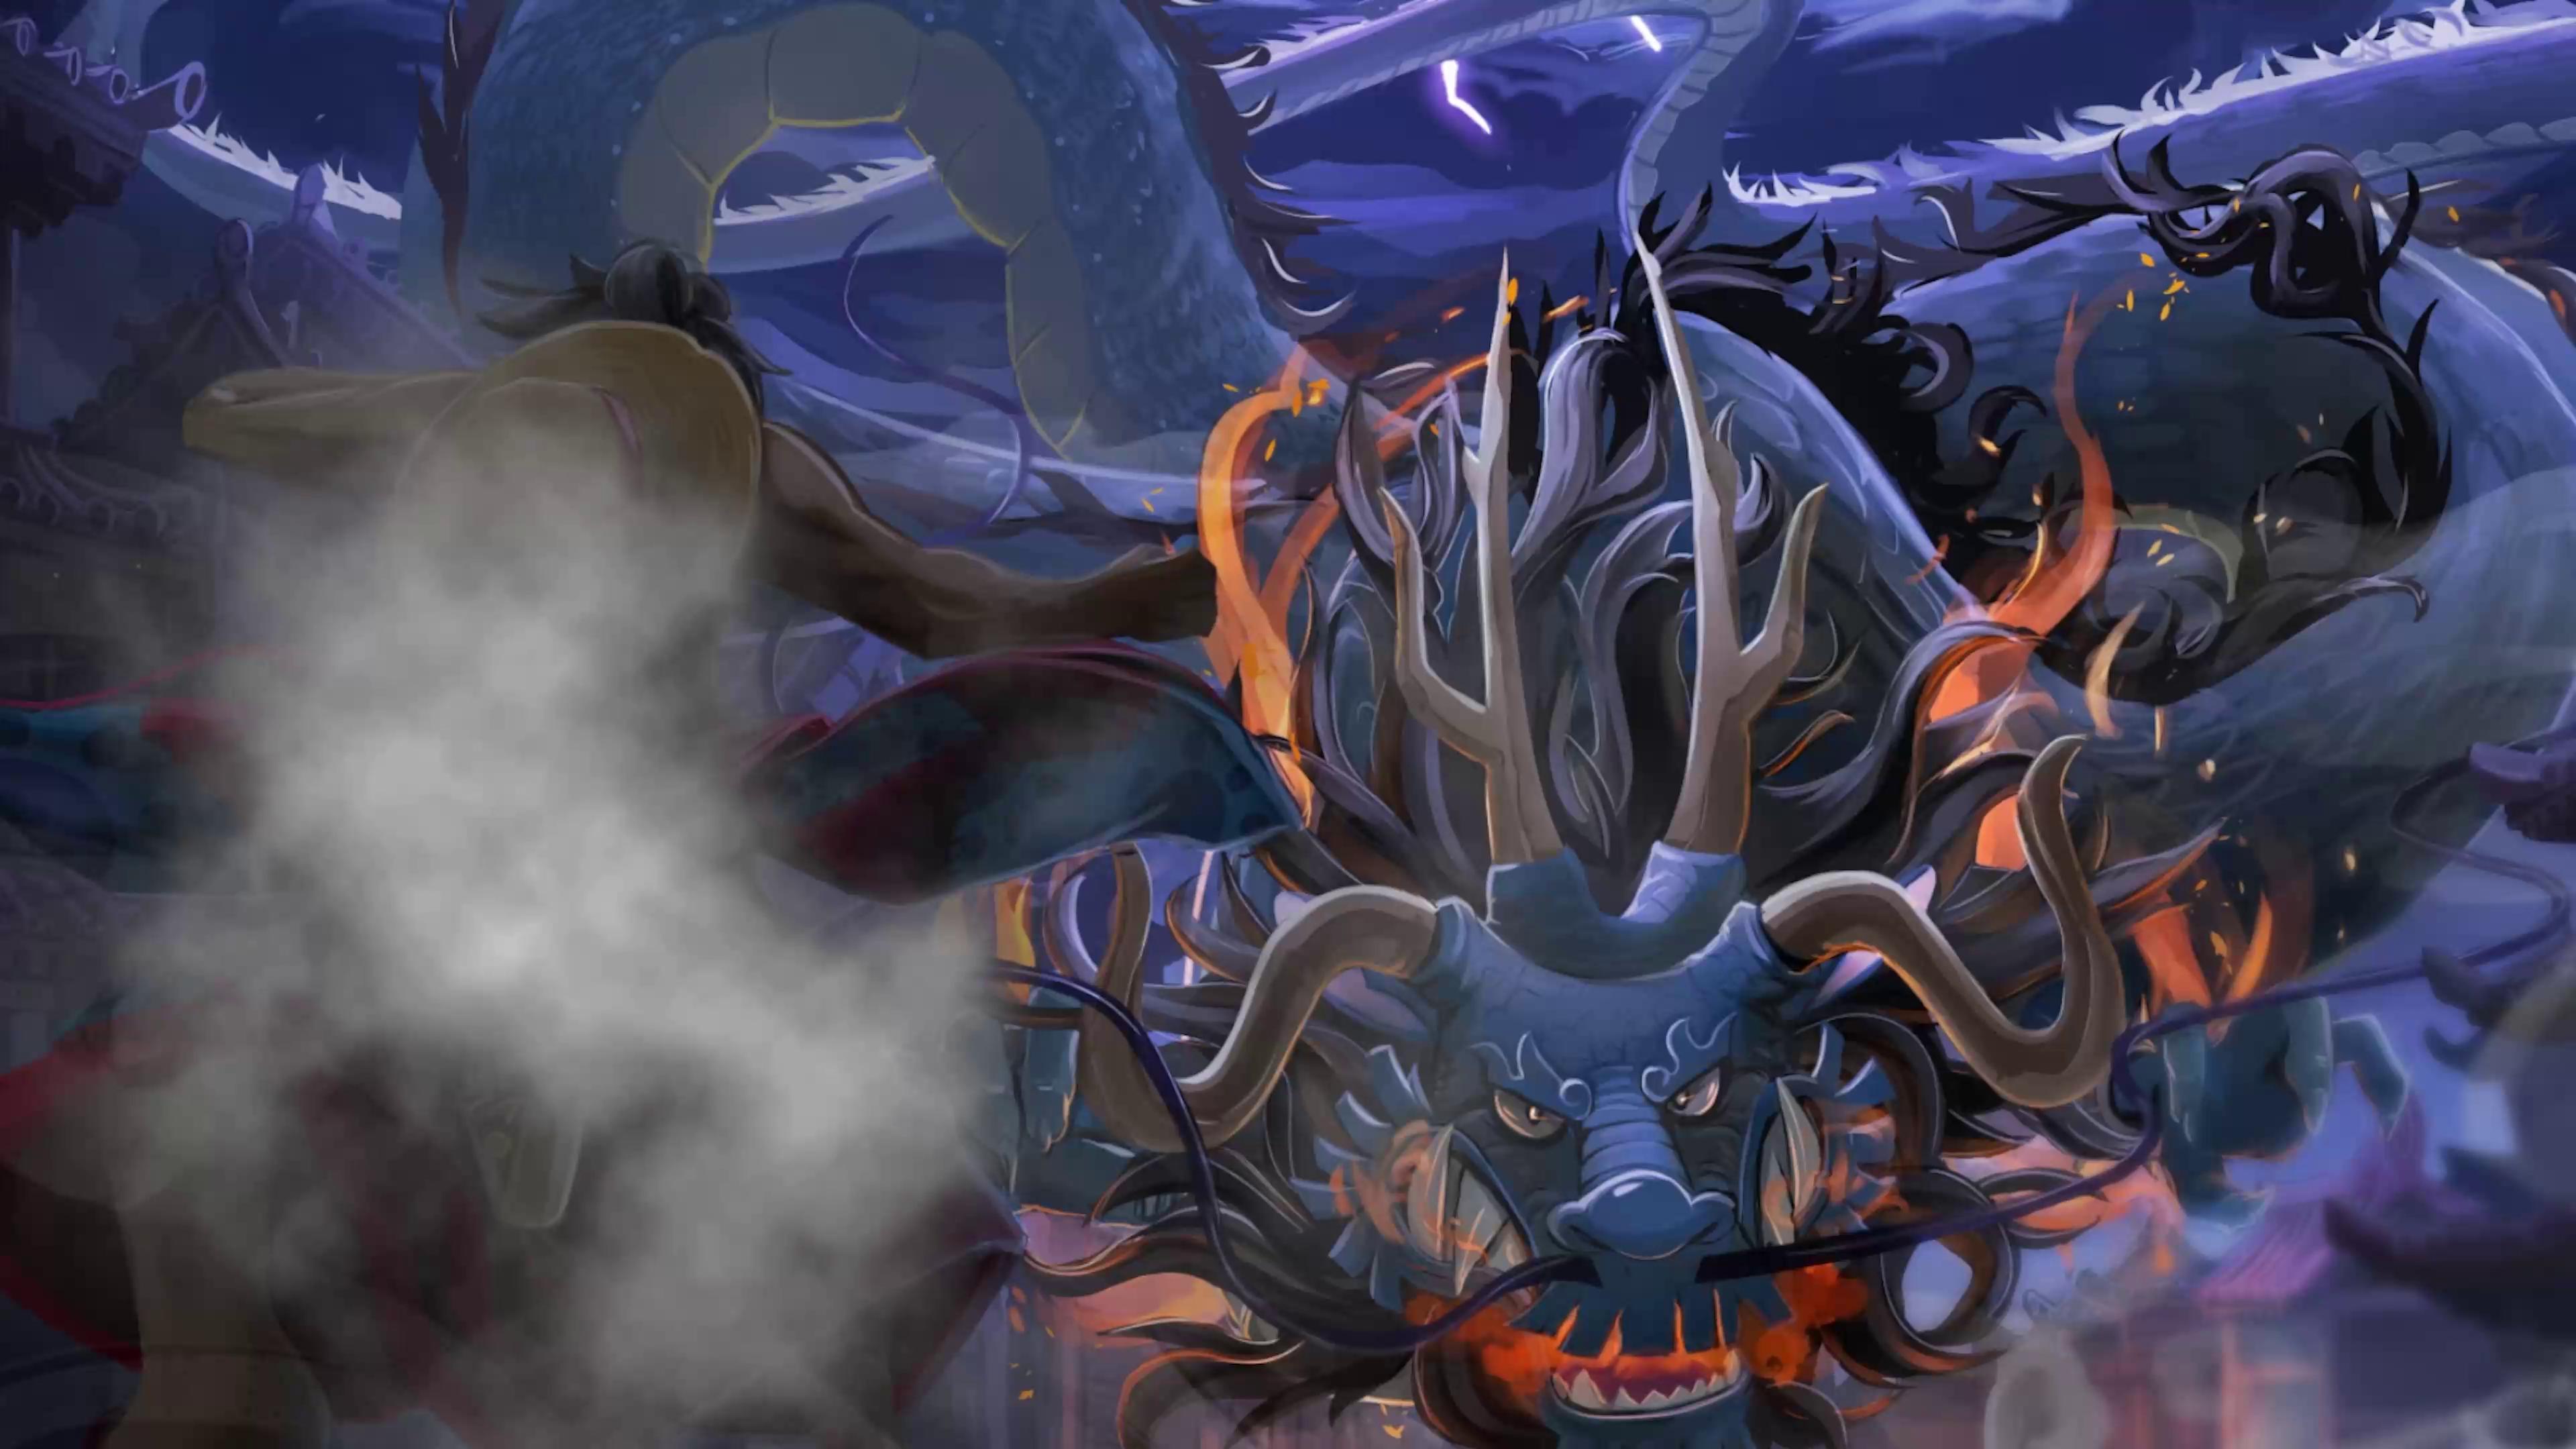 Kaido wallpaper i made the kaido in the middle is made by luis figueirado  art  rOnePiece